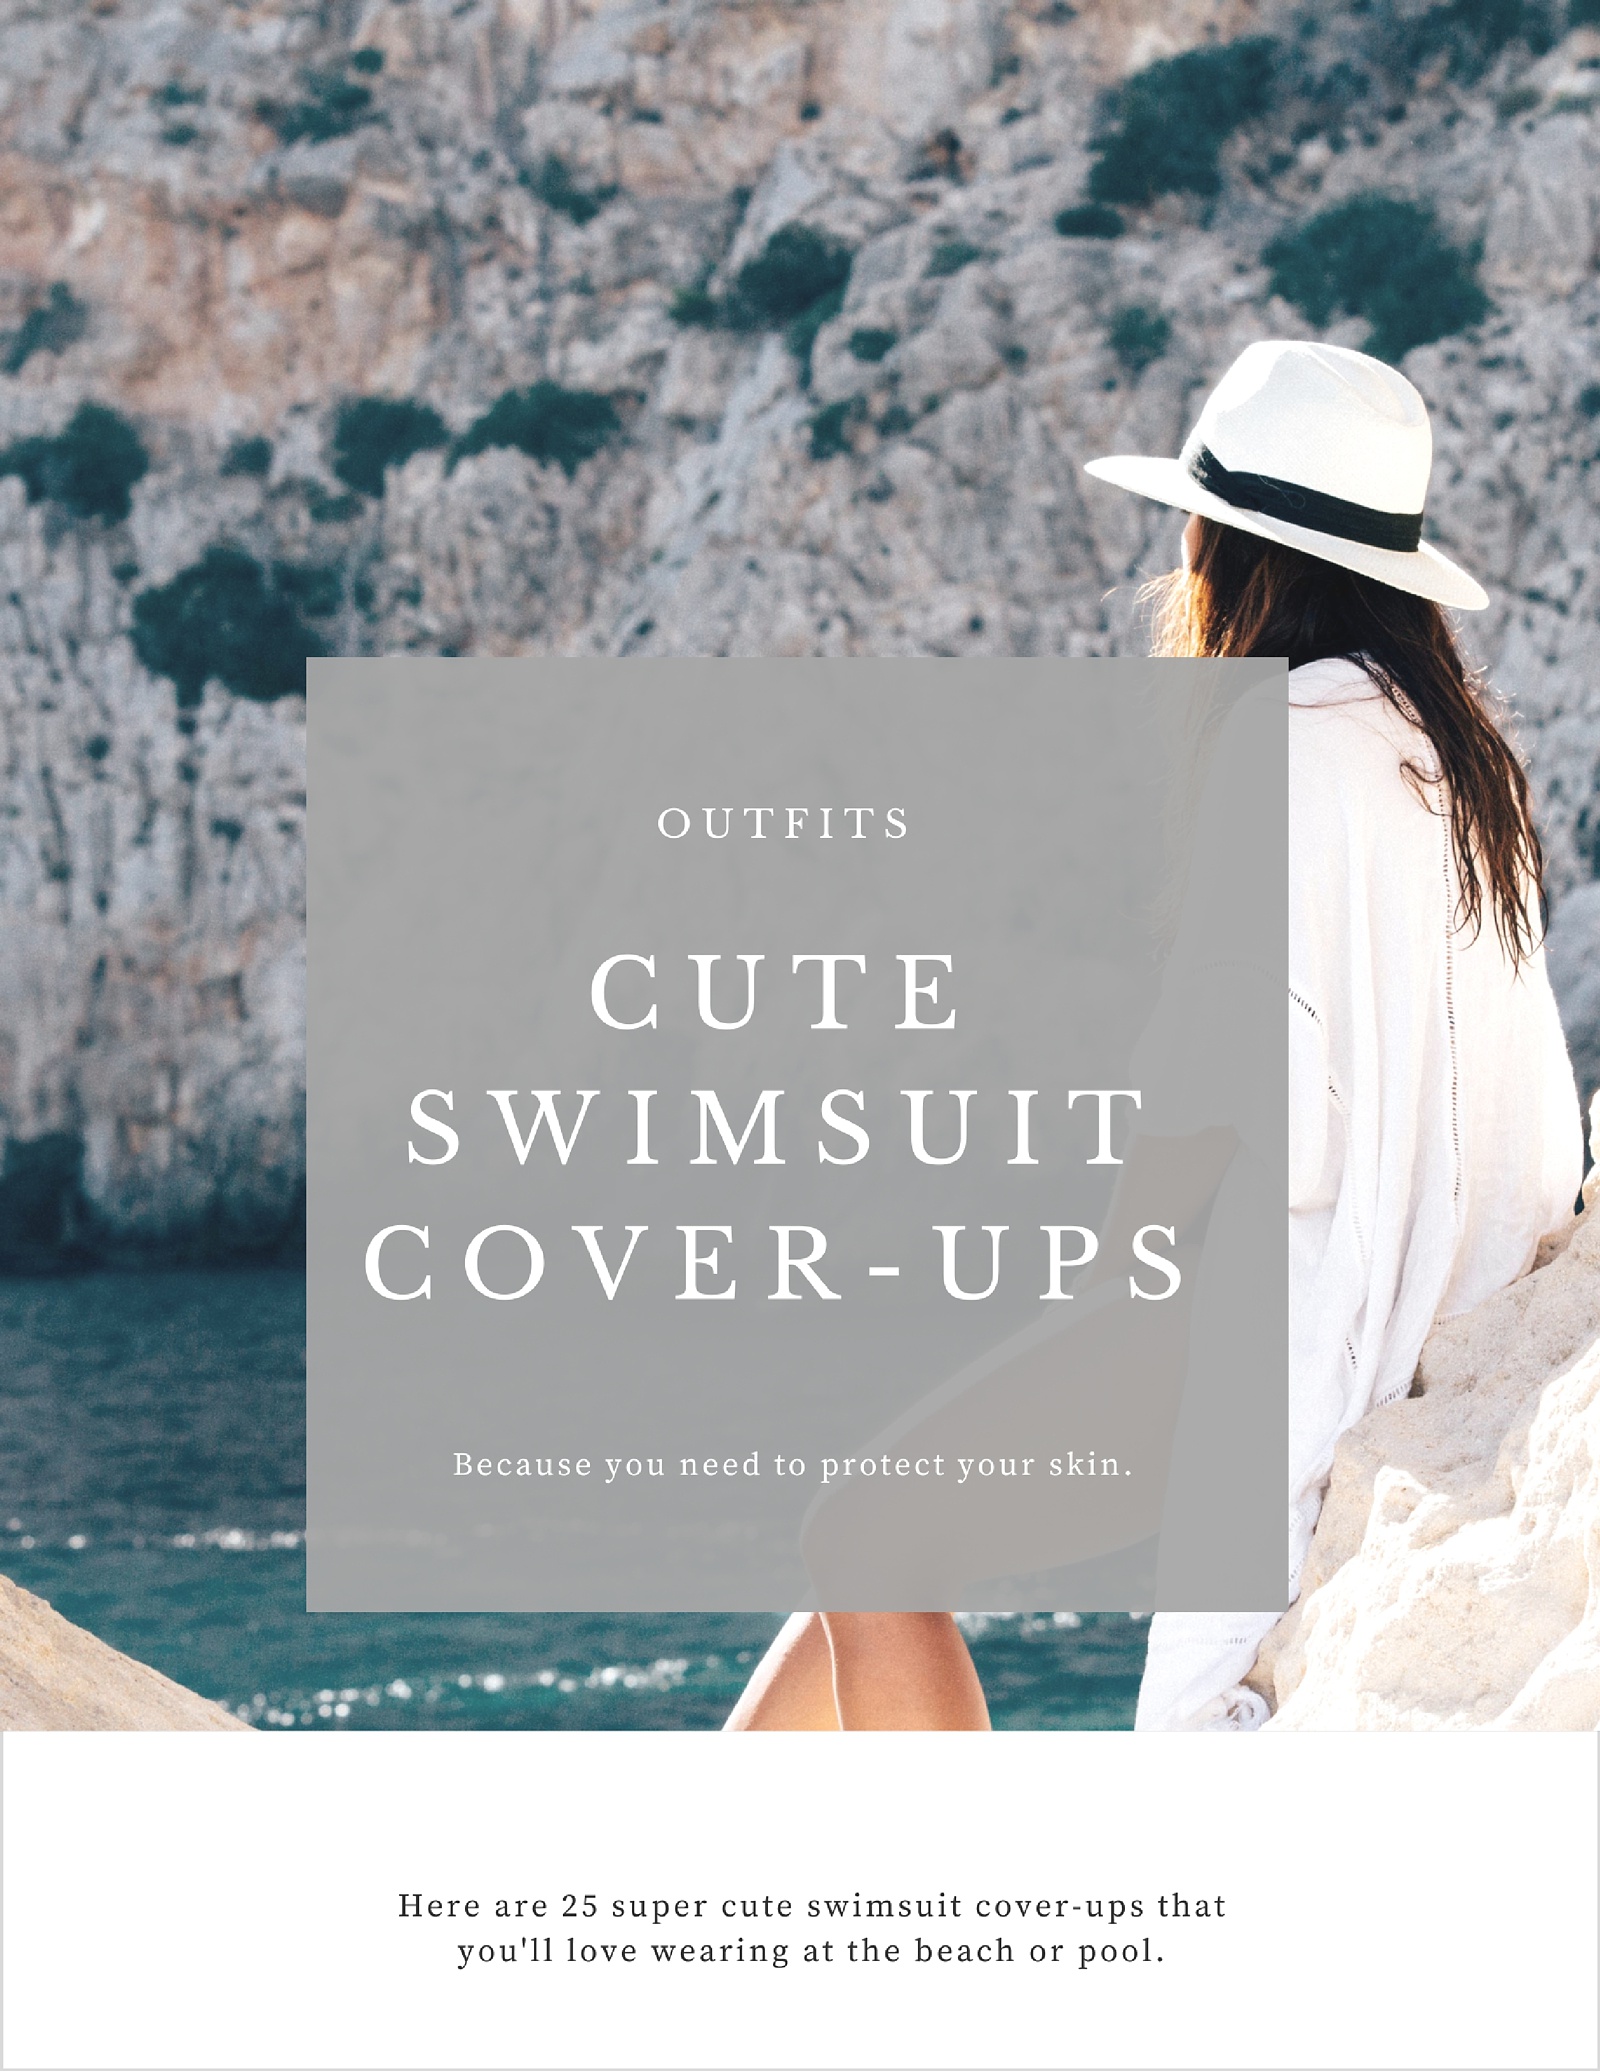 Friday Find: 25 Cute Swimsuit Cover-Ups